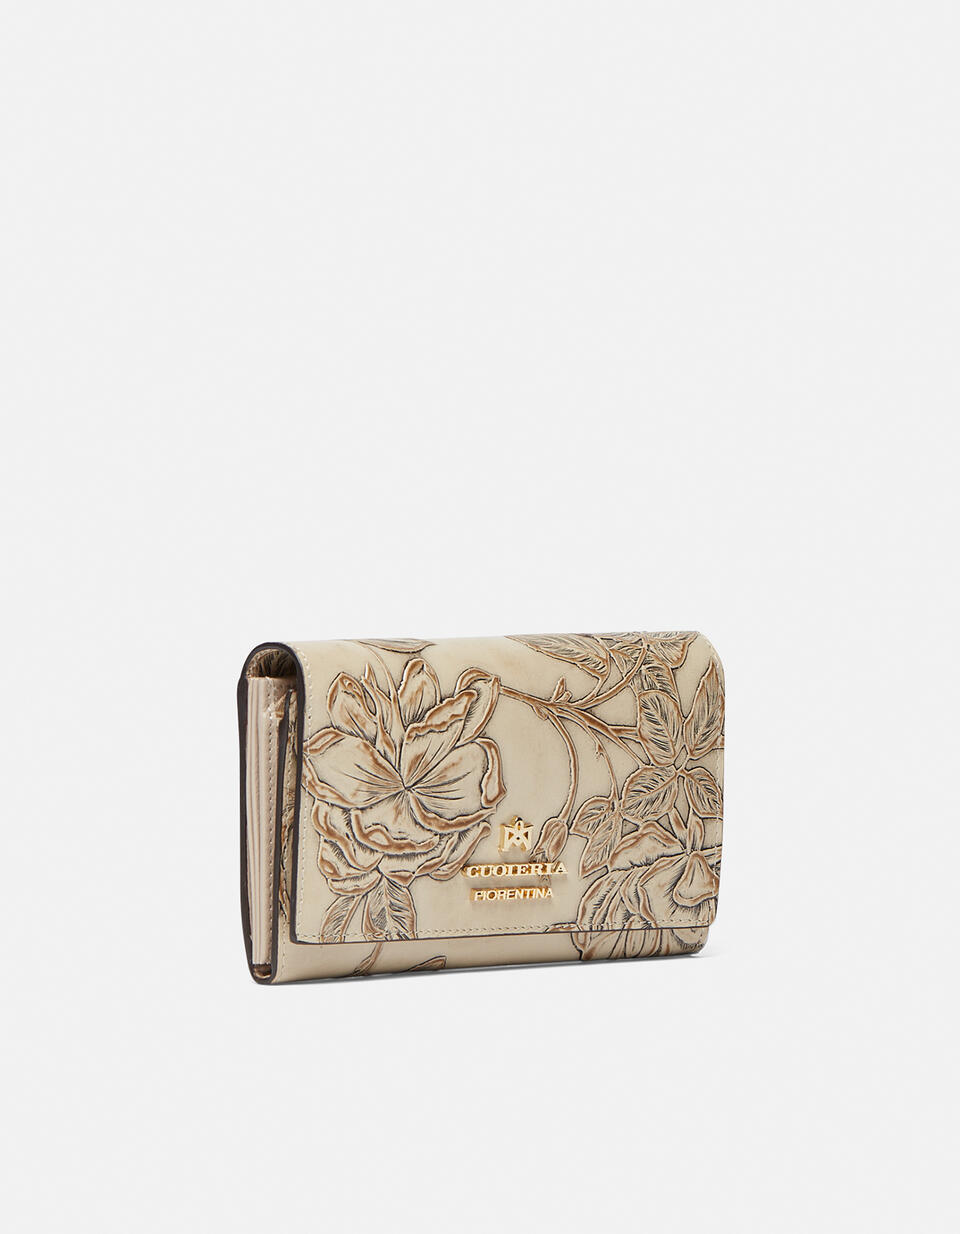 Accordian style calf leather wallet - Women's Wallets - Women's Wallets | Wallets Mimì TAUPE - Women's Wallets - Women's Wallets | WalletsCuoieria Fiorentina